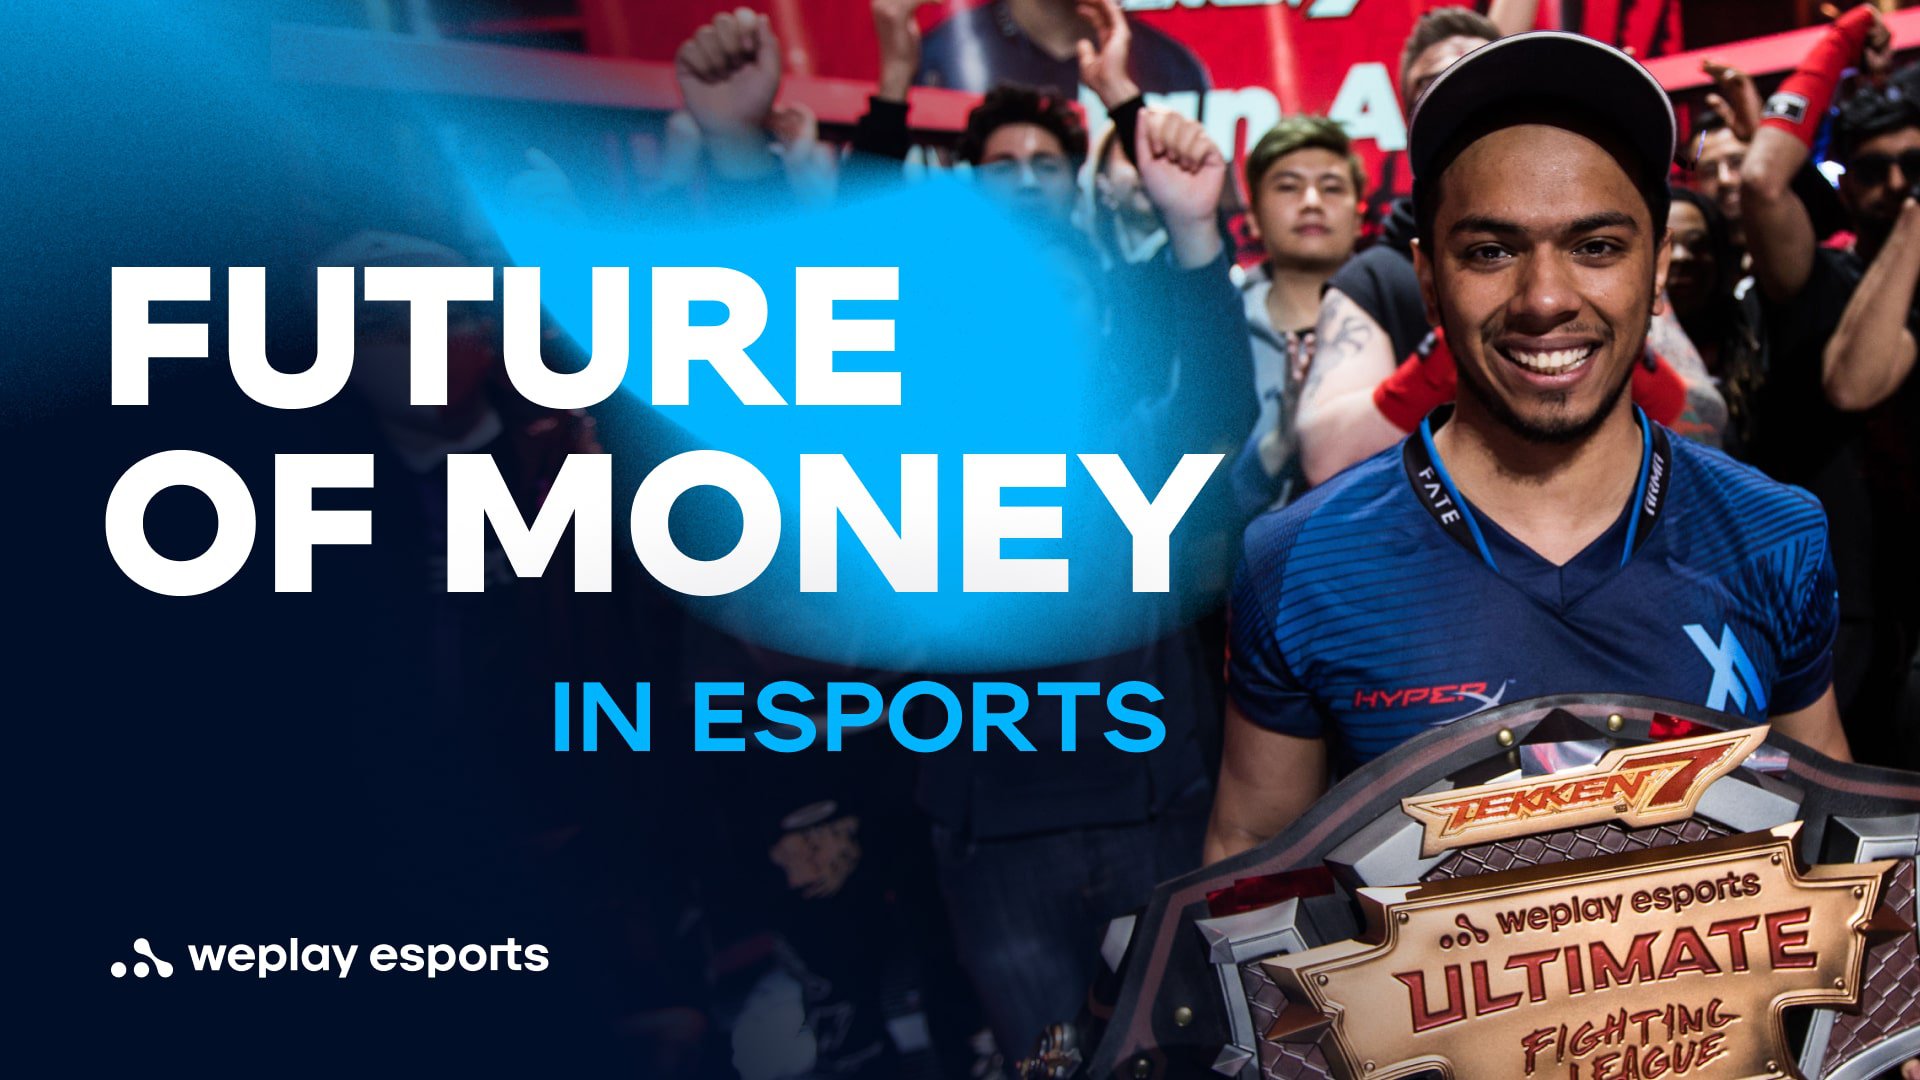 Future of money in esports. Credit: WePlay Holding